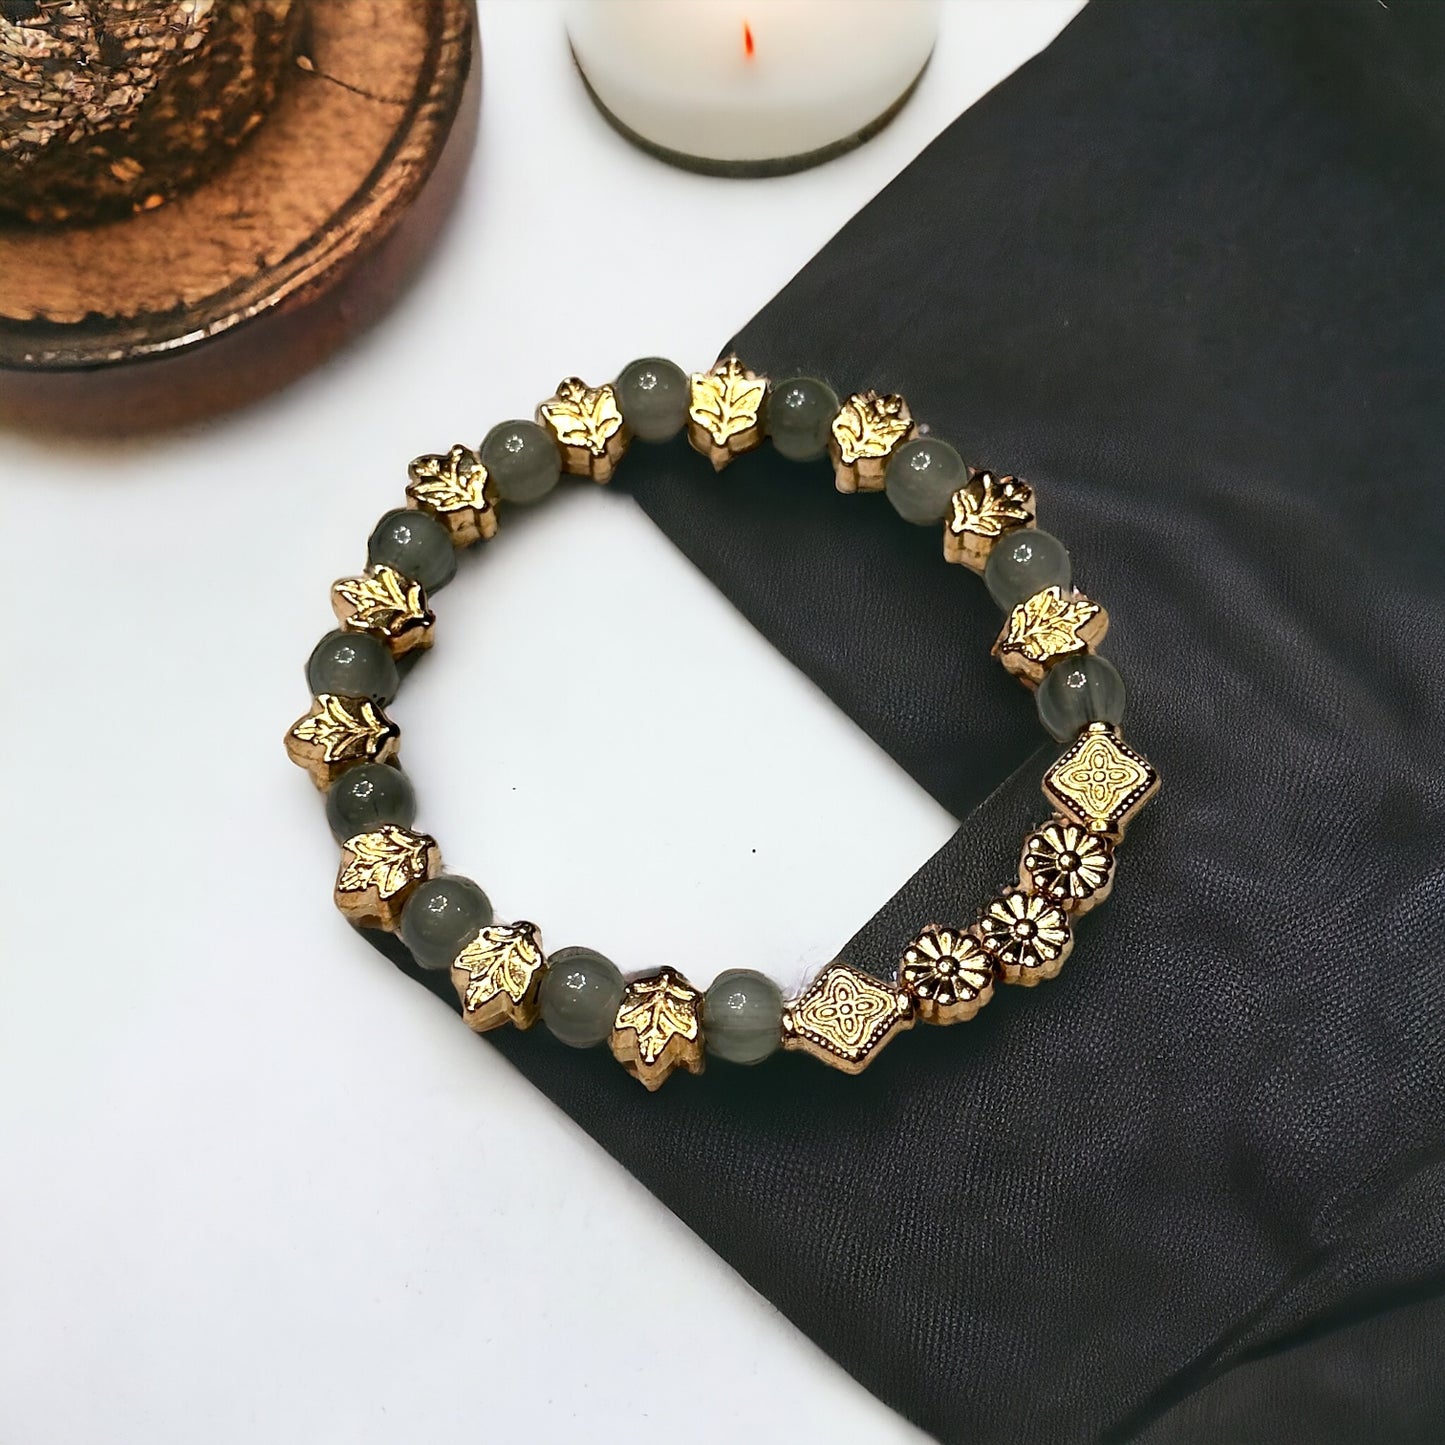 Green Beaded Stretch Bracelet with Gold Leaf Accent Beads